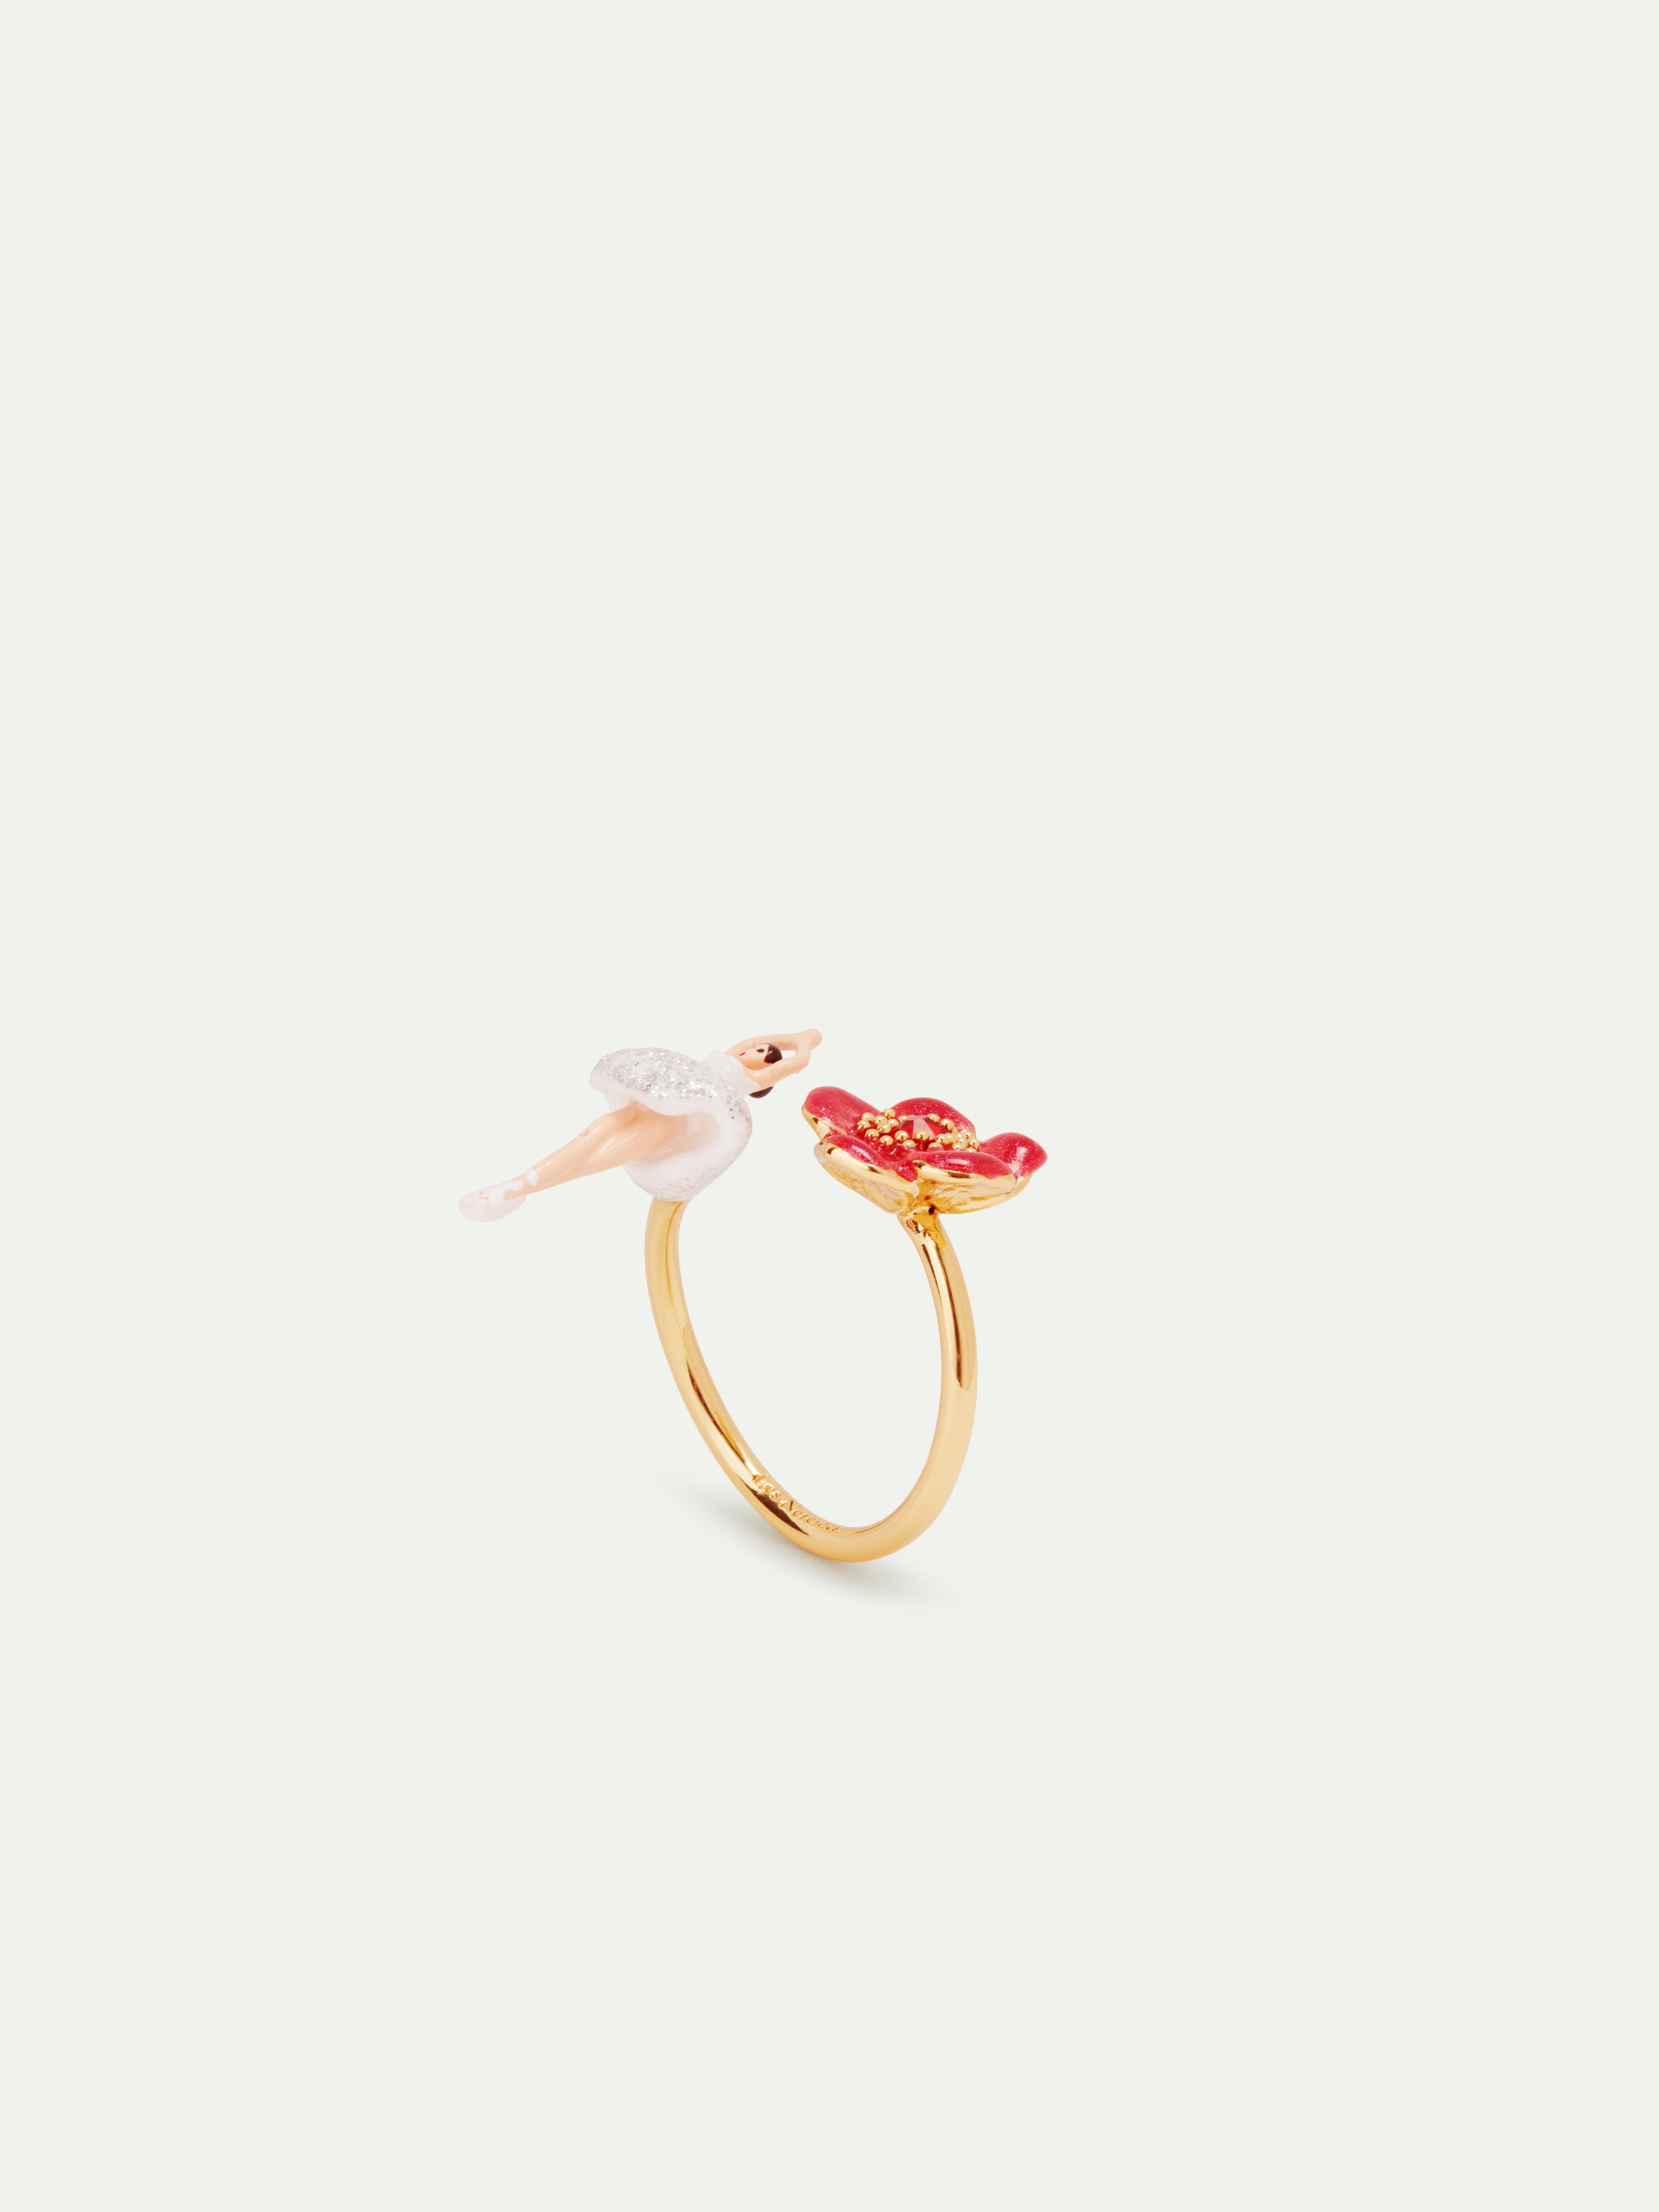 Ballerina and red flower adjustable ring